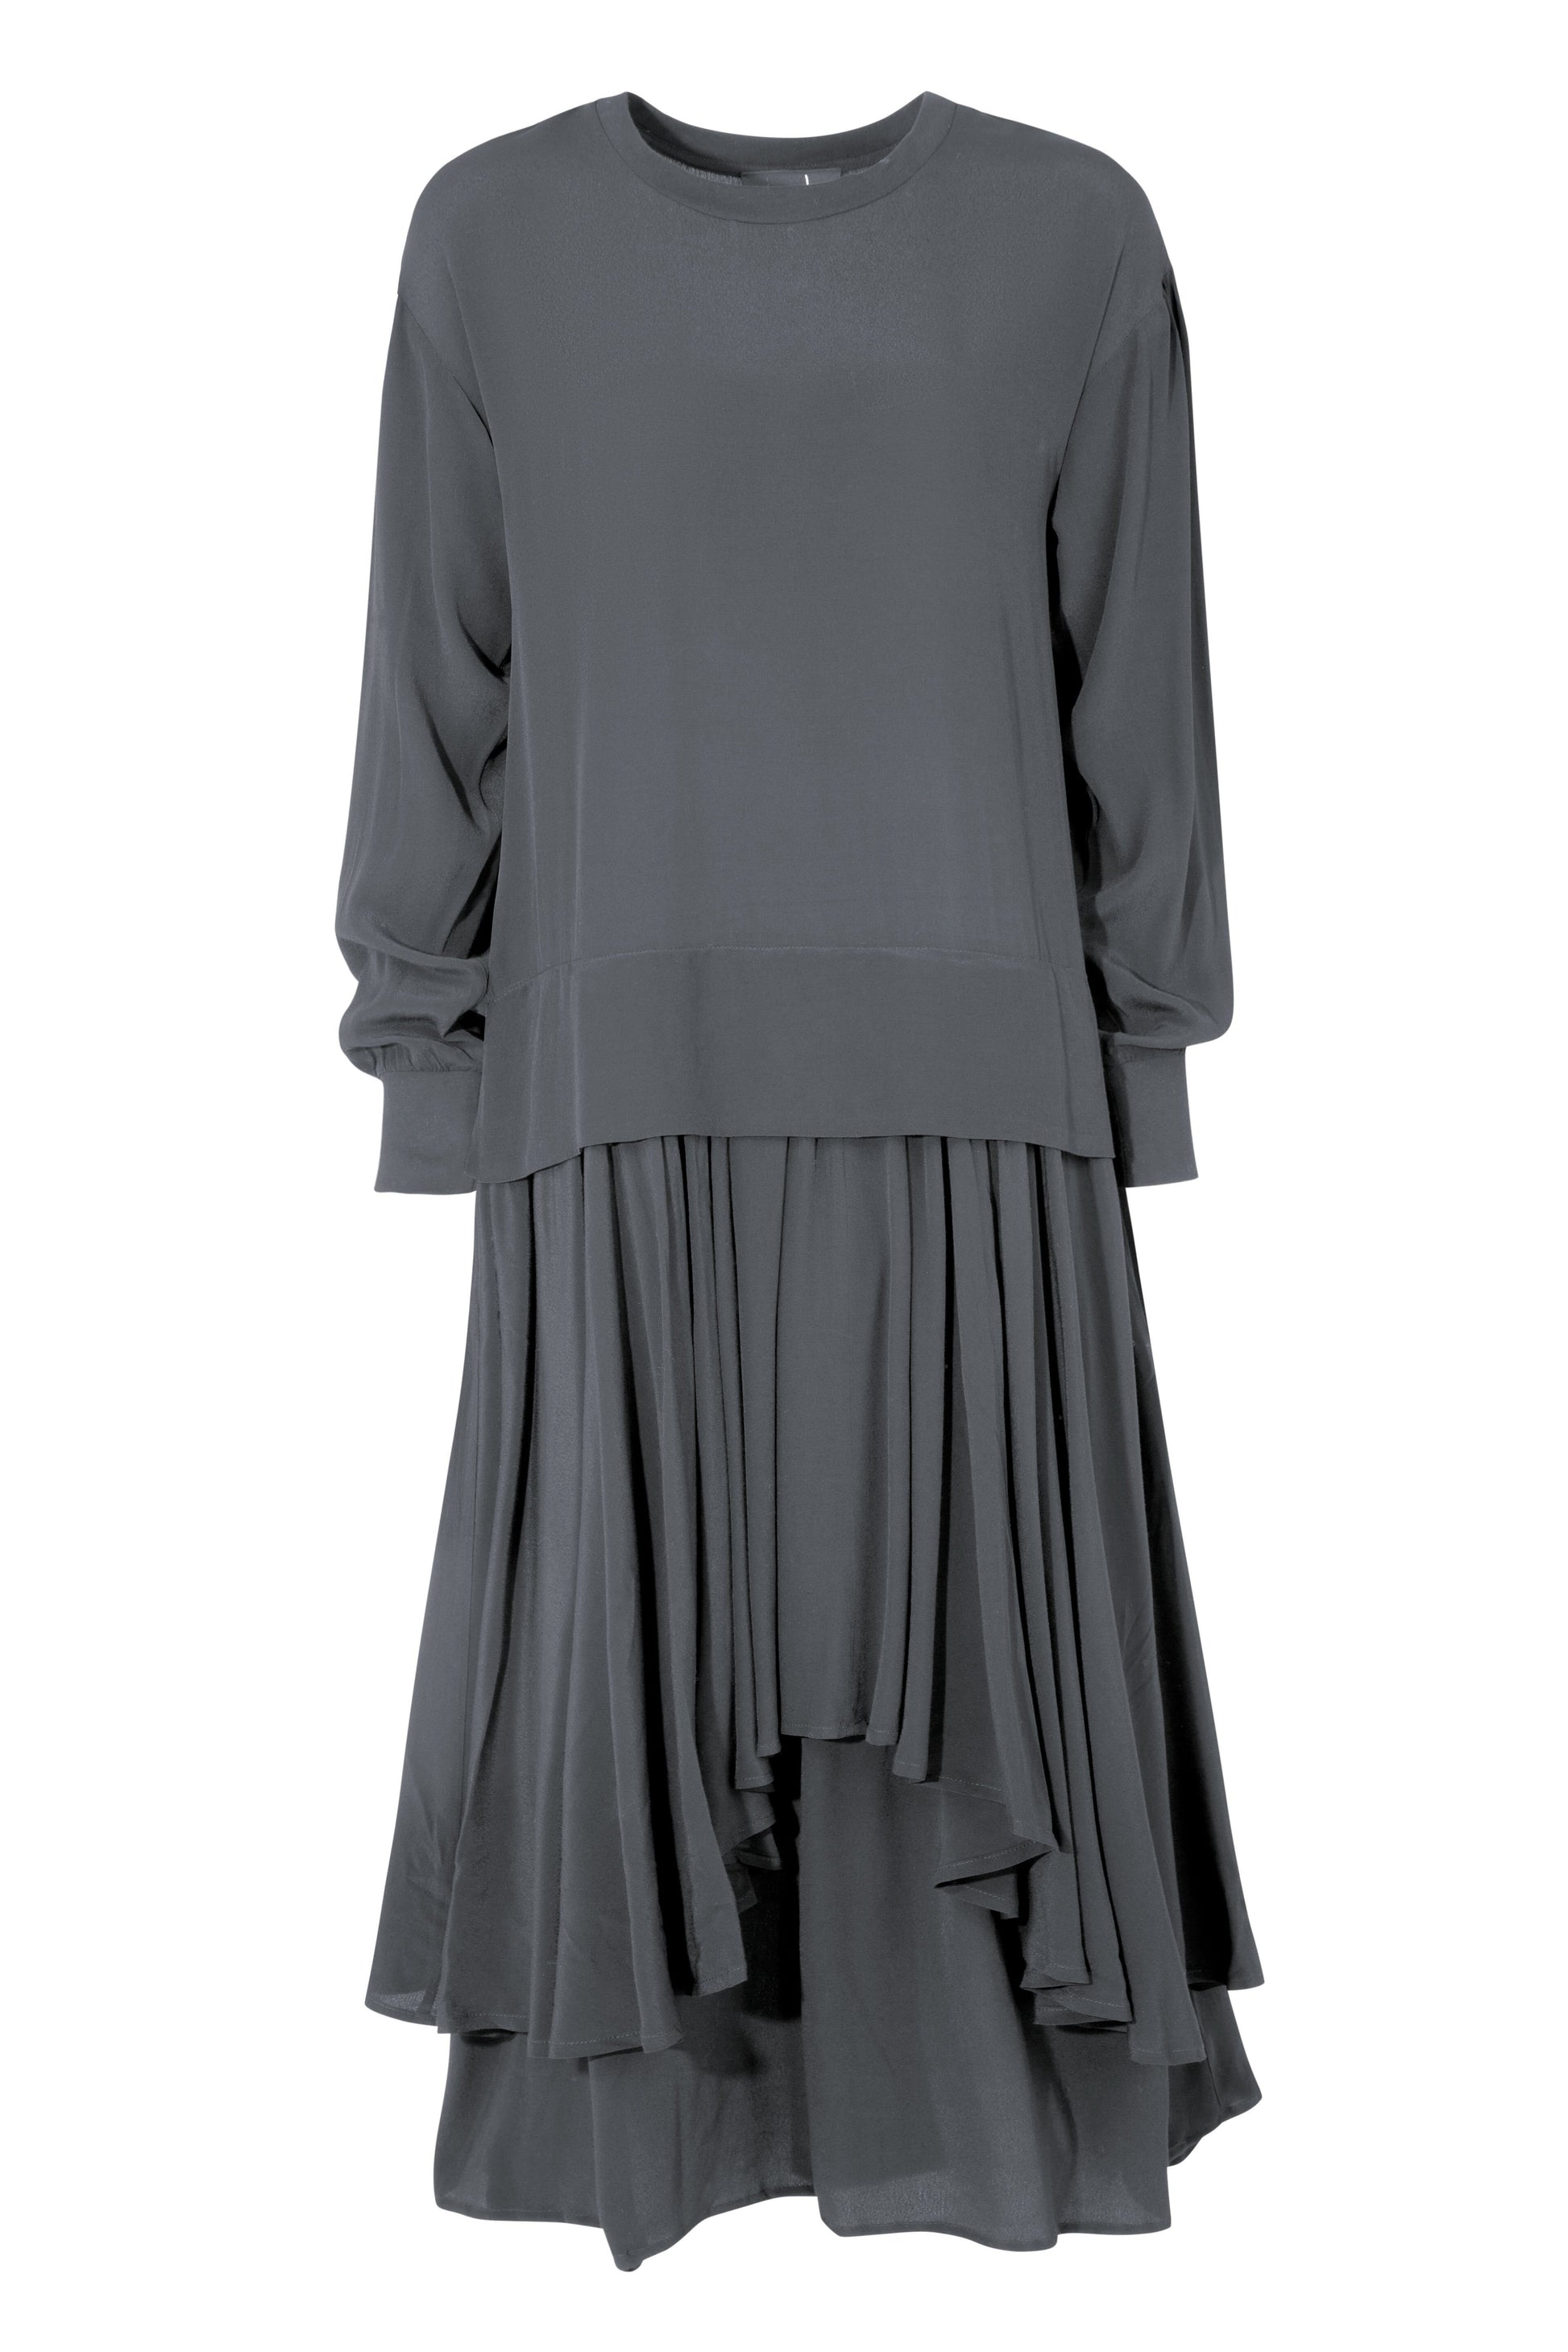 CURATE ALL YOU NEED DRESS - STEEL - THE VOGUE STORE